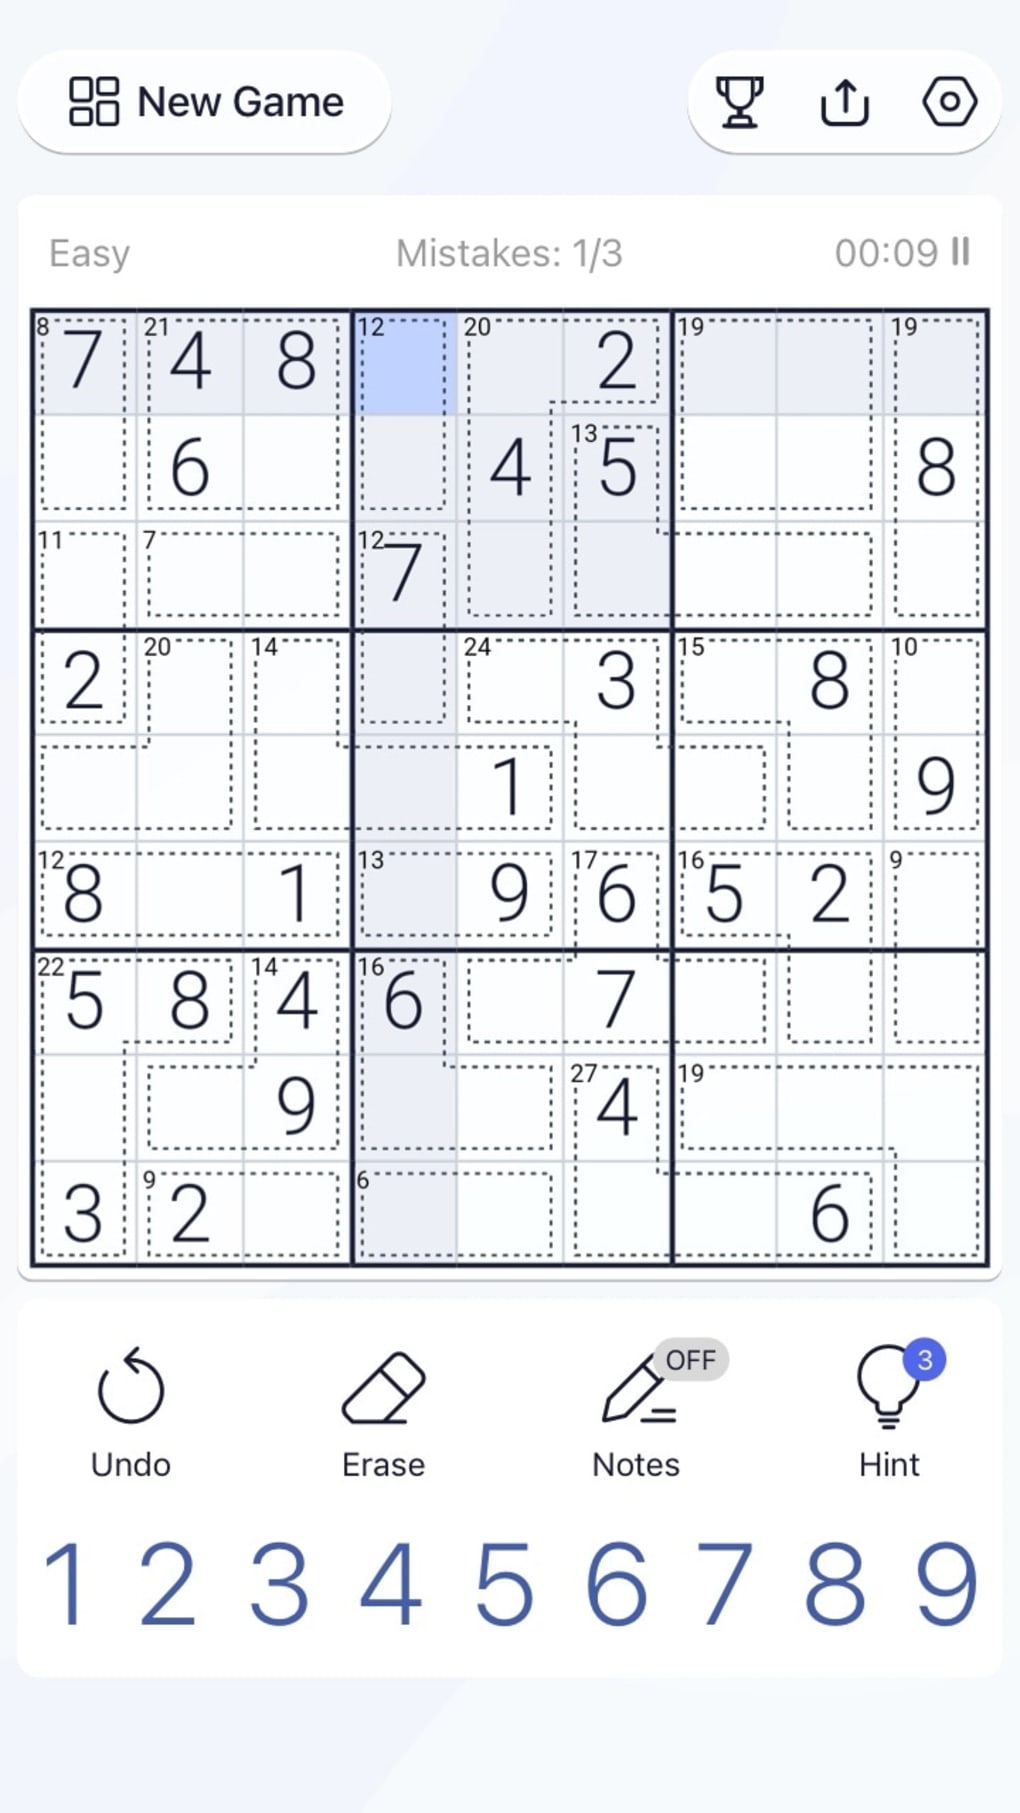 Killer Sudoku - Sudoku Puzzles Game for Android - Download